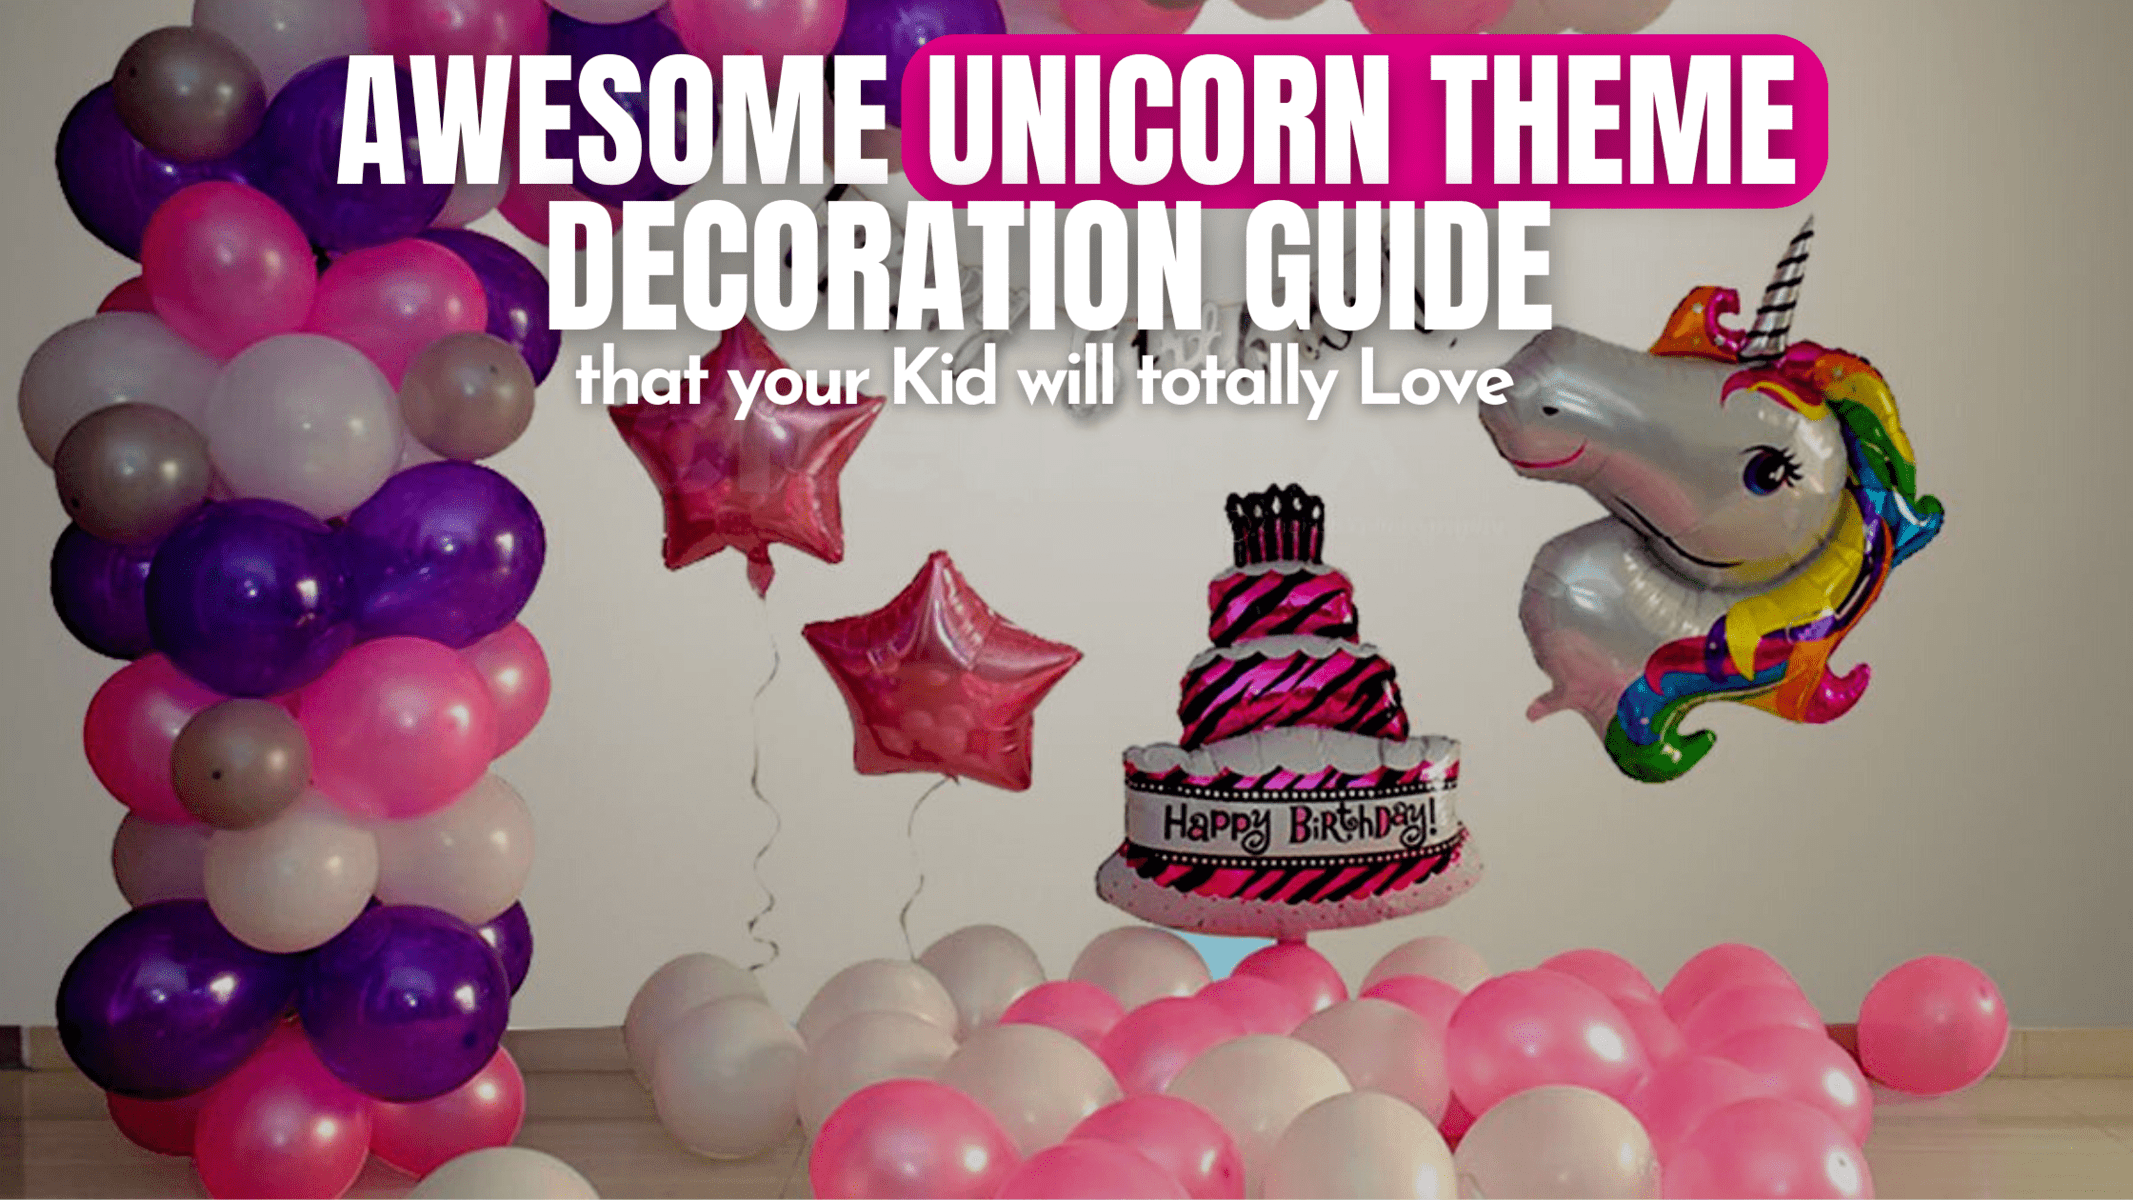 Awesome Unicorn Theme Decoration Guide that your Kid will totally Love